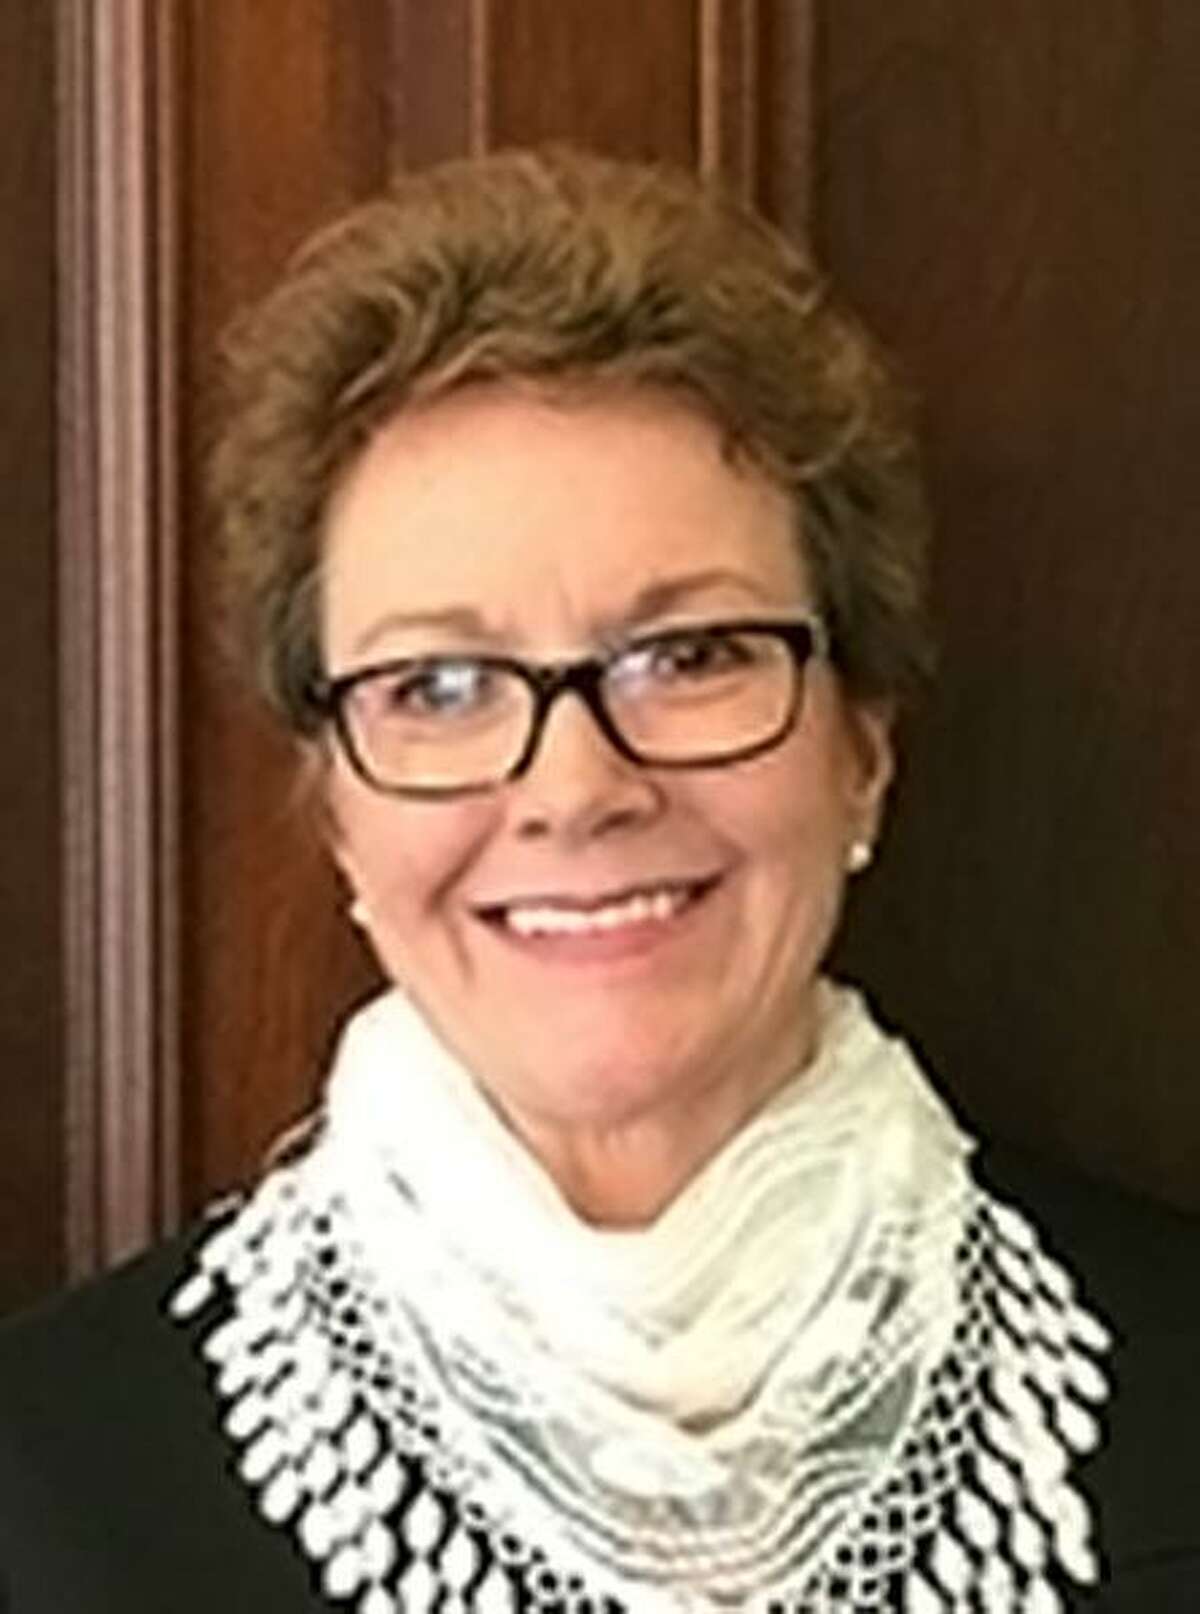 Probate Court 1 Judge Kelly Cross said she was pleased that the county approved $116,000 to fund five months of the probate courts’ guardianship program for people with incapacitating mental or physical conditions.